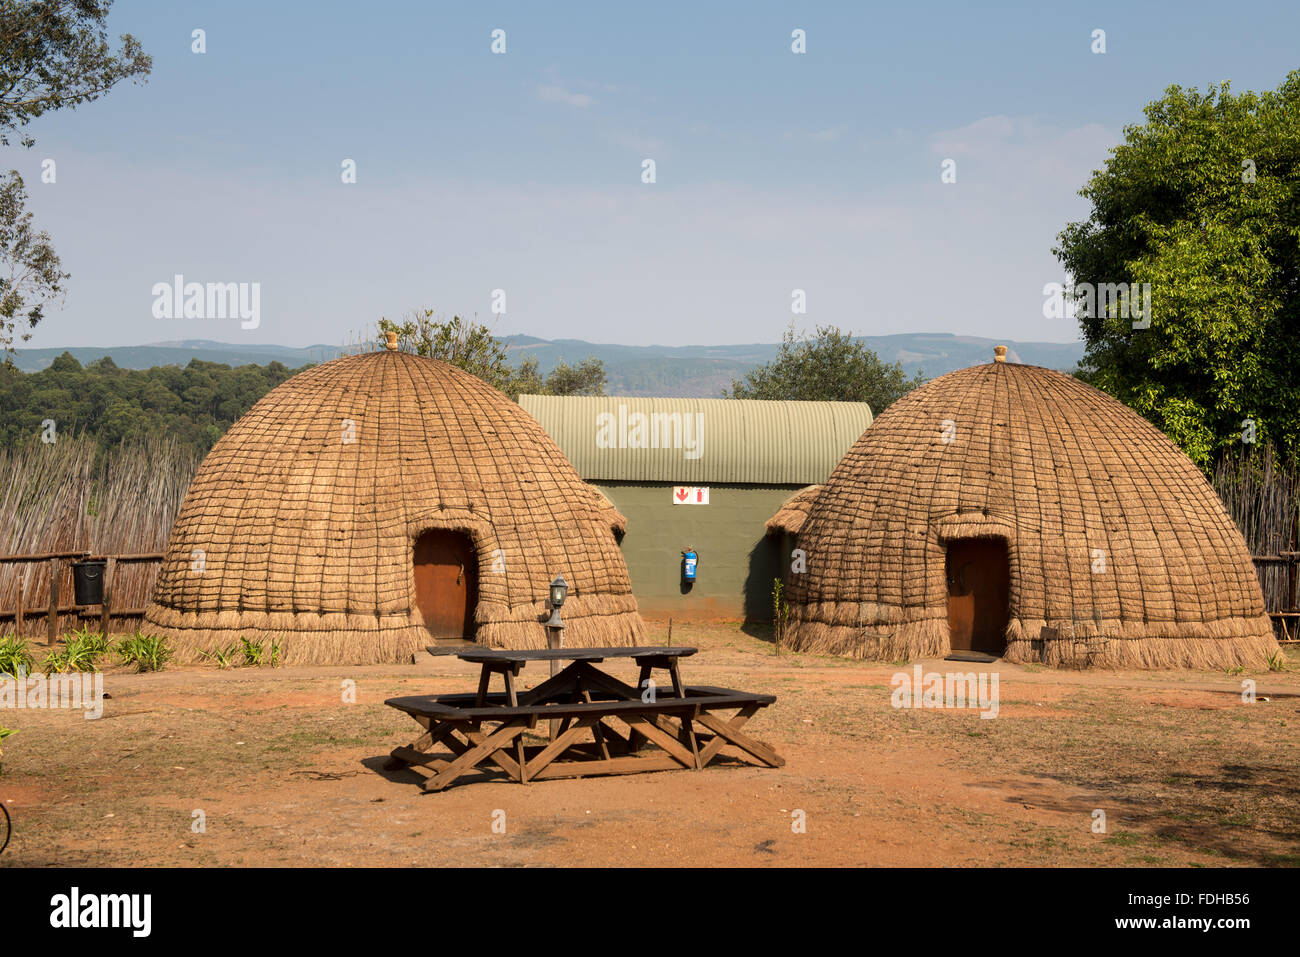 Beehive Huts at the Mlilwane Wildlife Sanctuary in Swaziland, Africa. Stock Photo